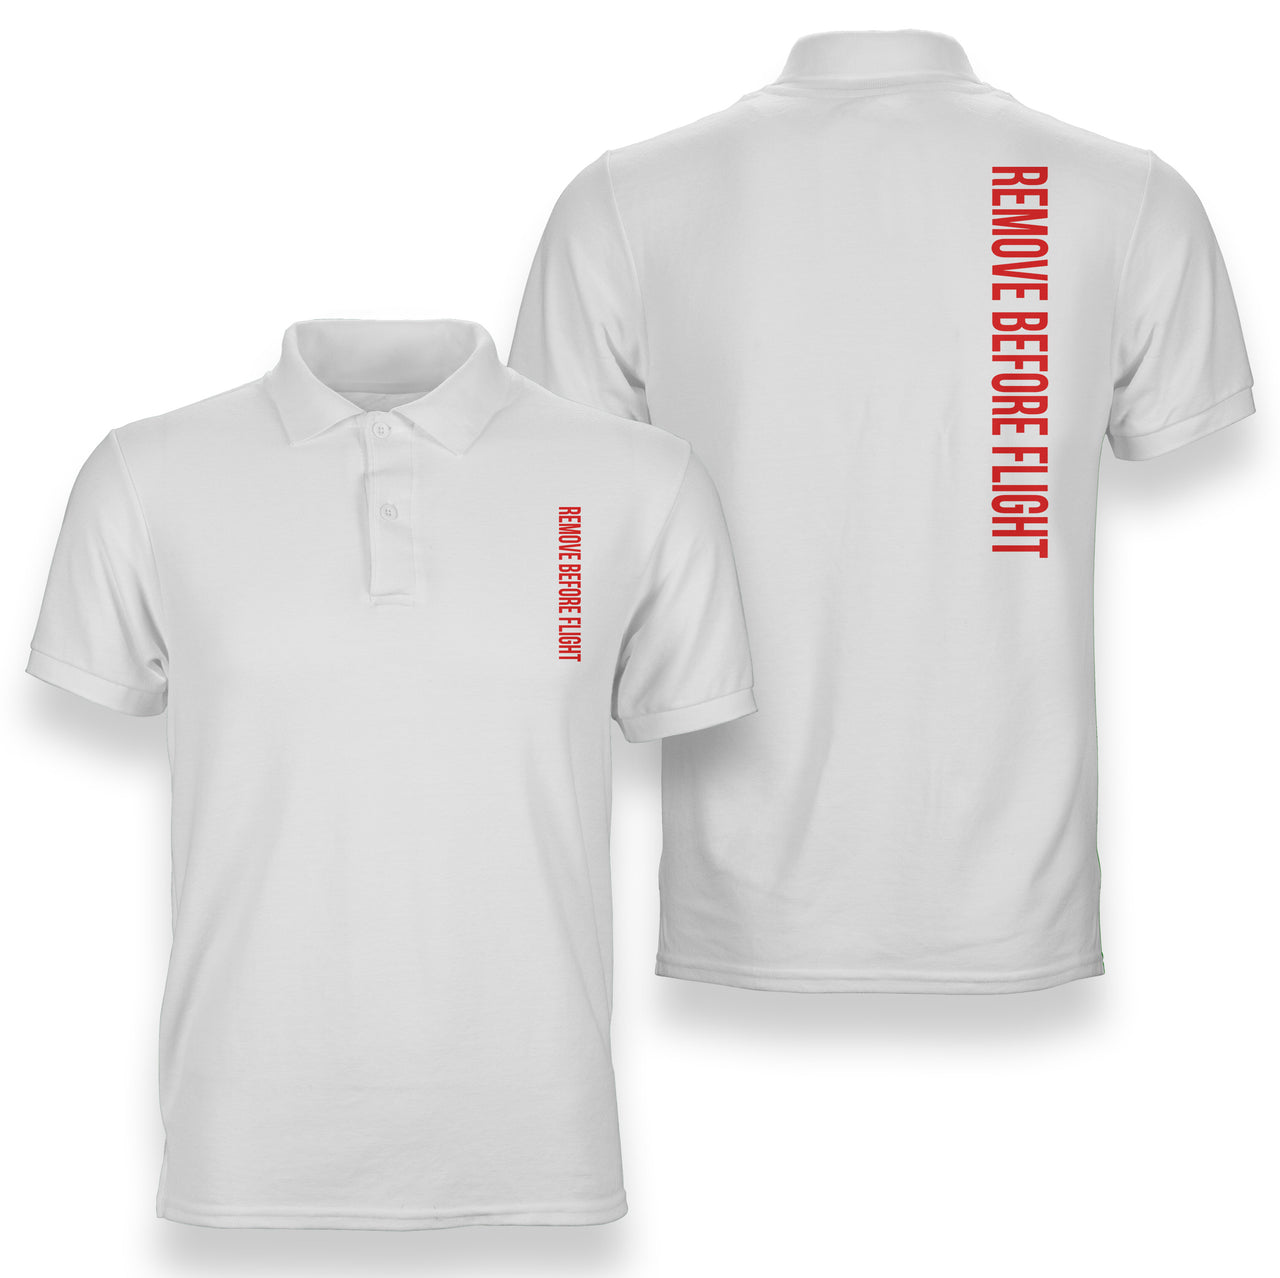 Remove Before Flight 2 Designed Double Side Polo T-Shirts